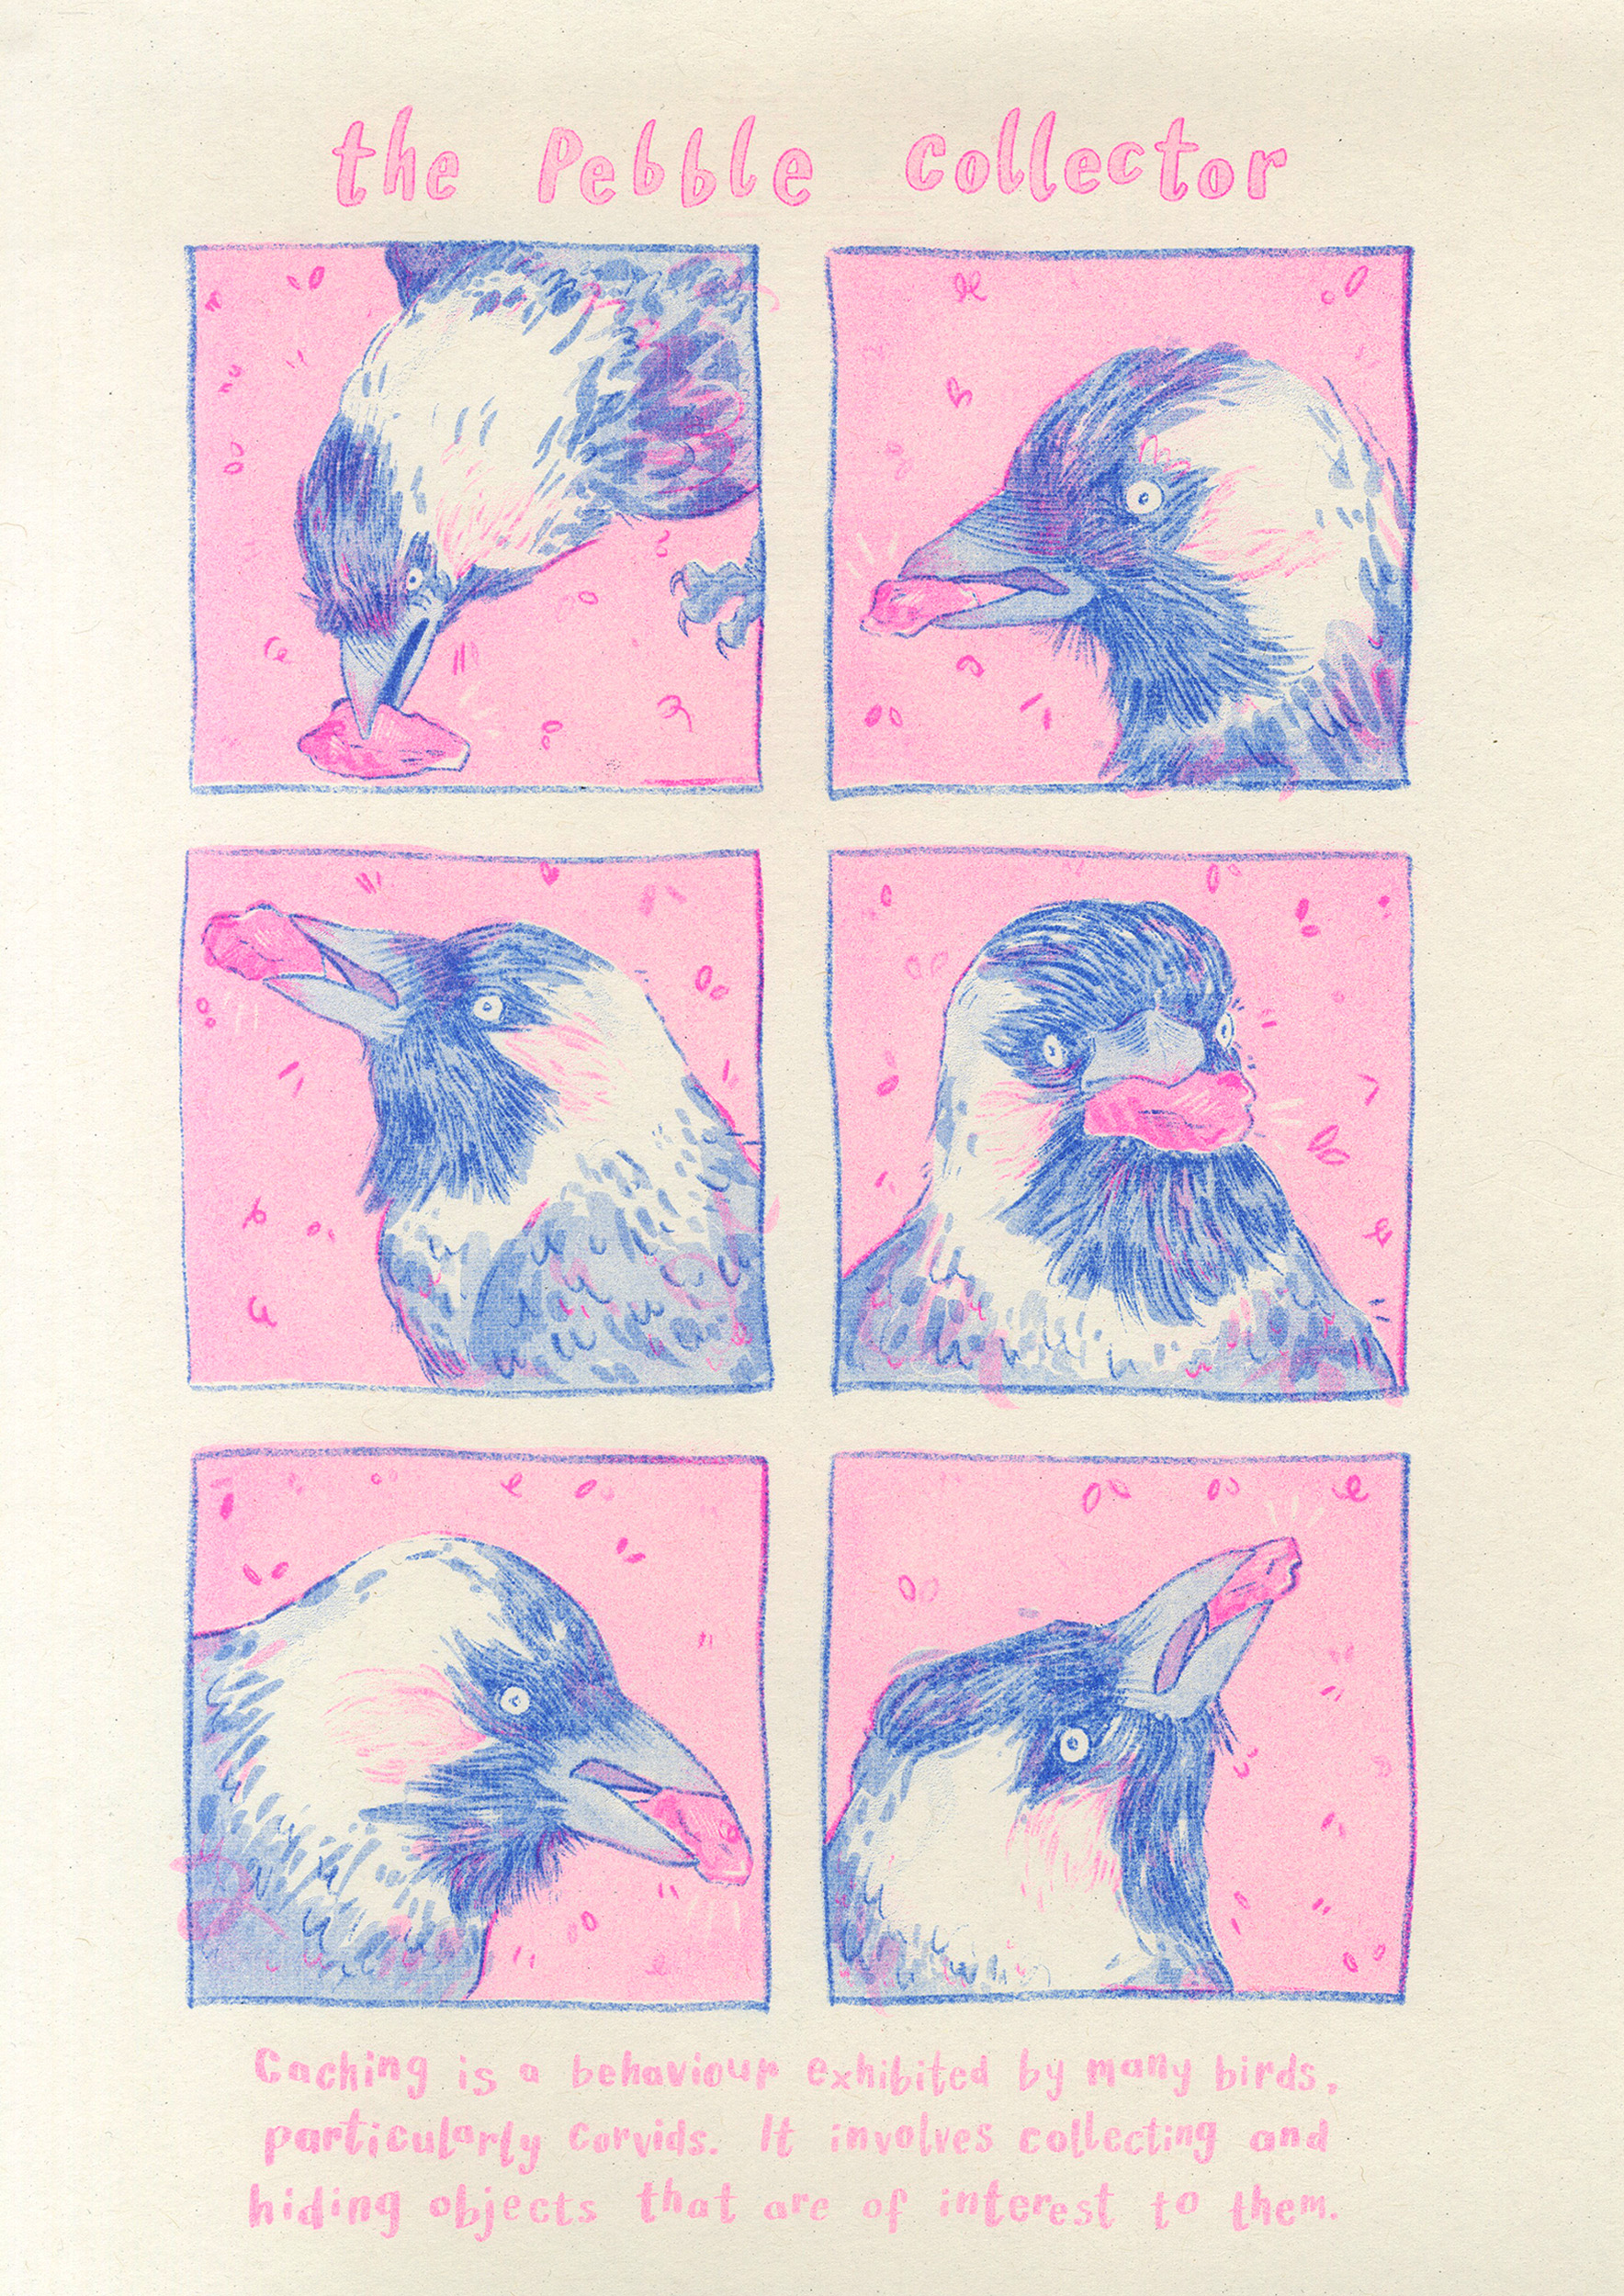 A fluorescent pink and blue poster containing six images of jackdaws holding pebbles. The poster explains how these birds frequently collect and hide objects.